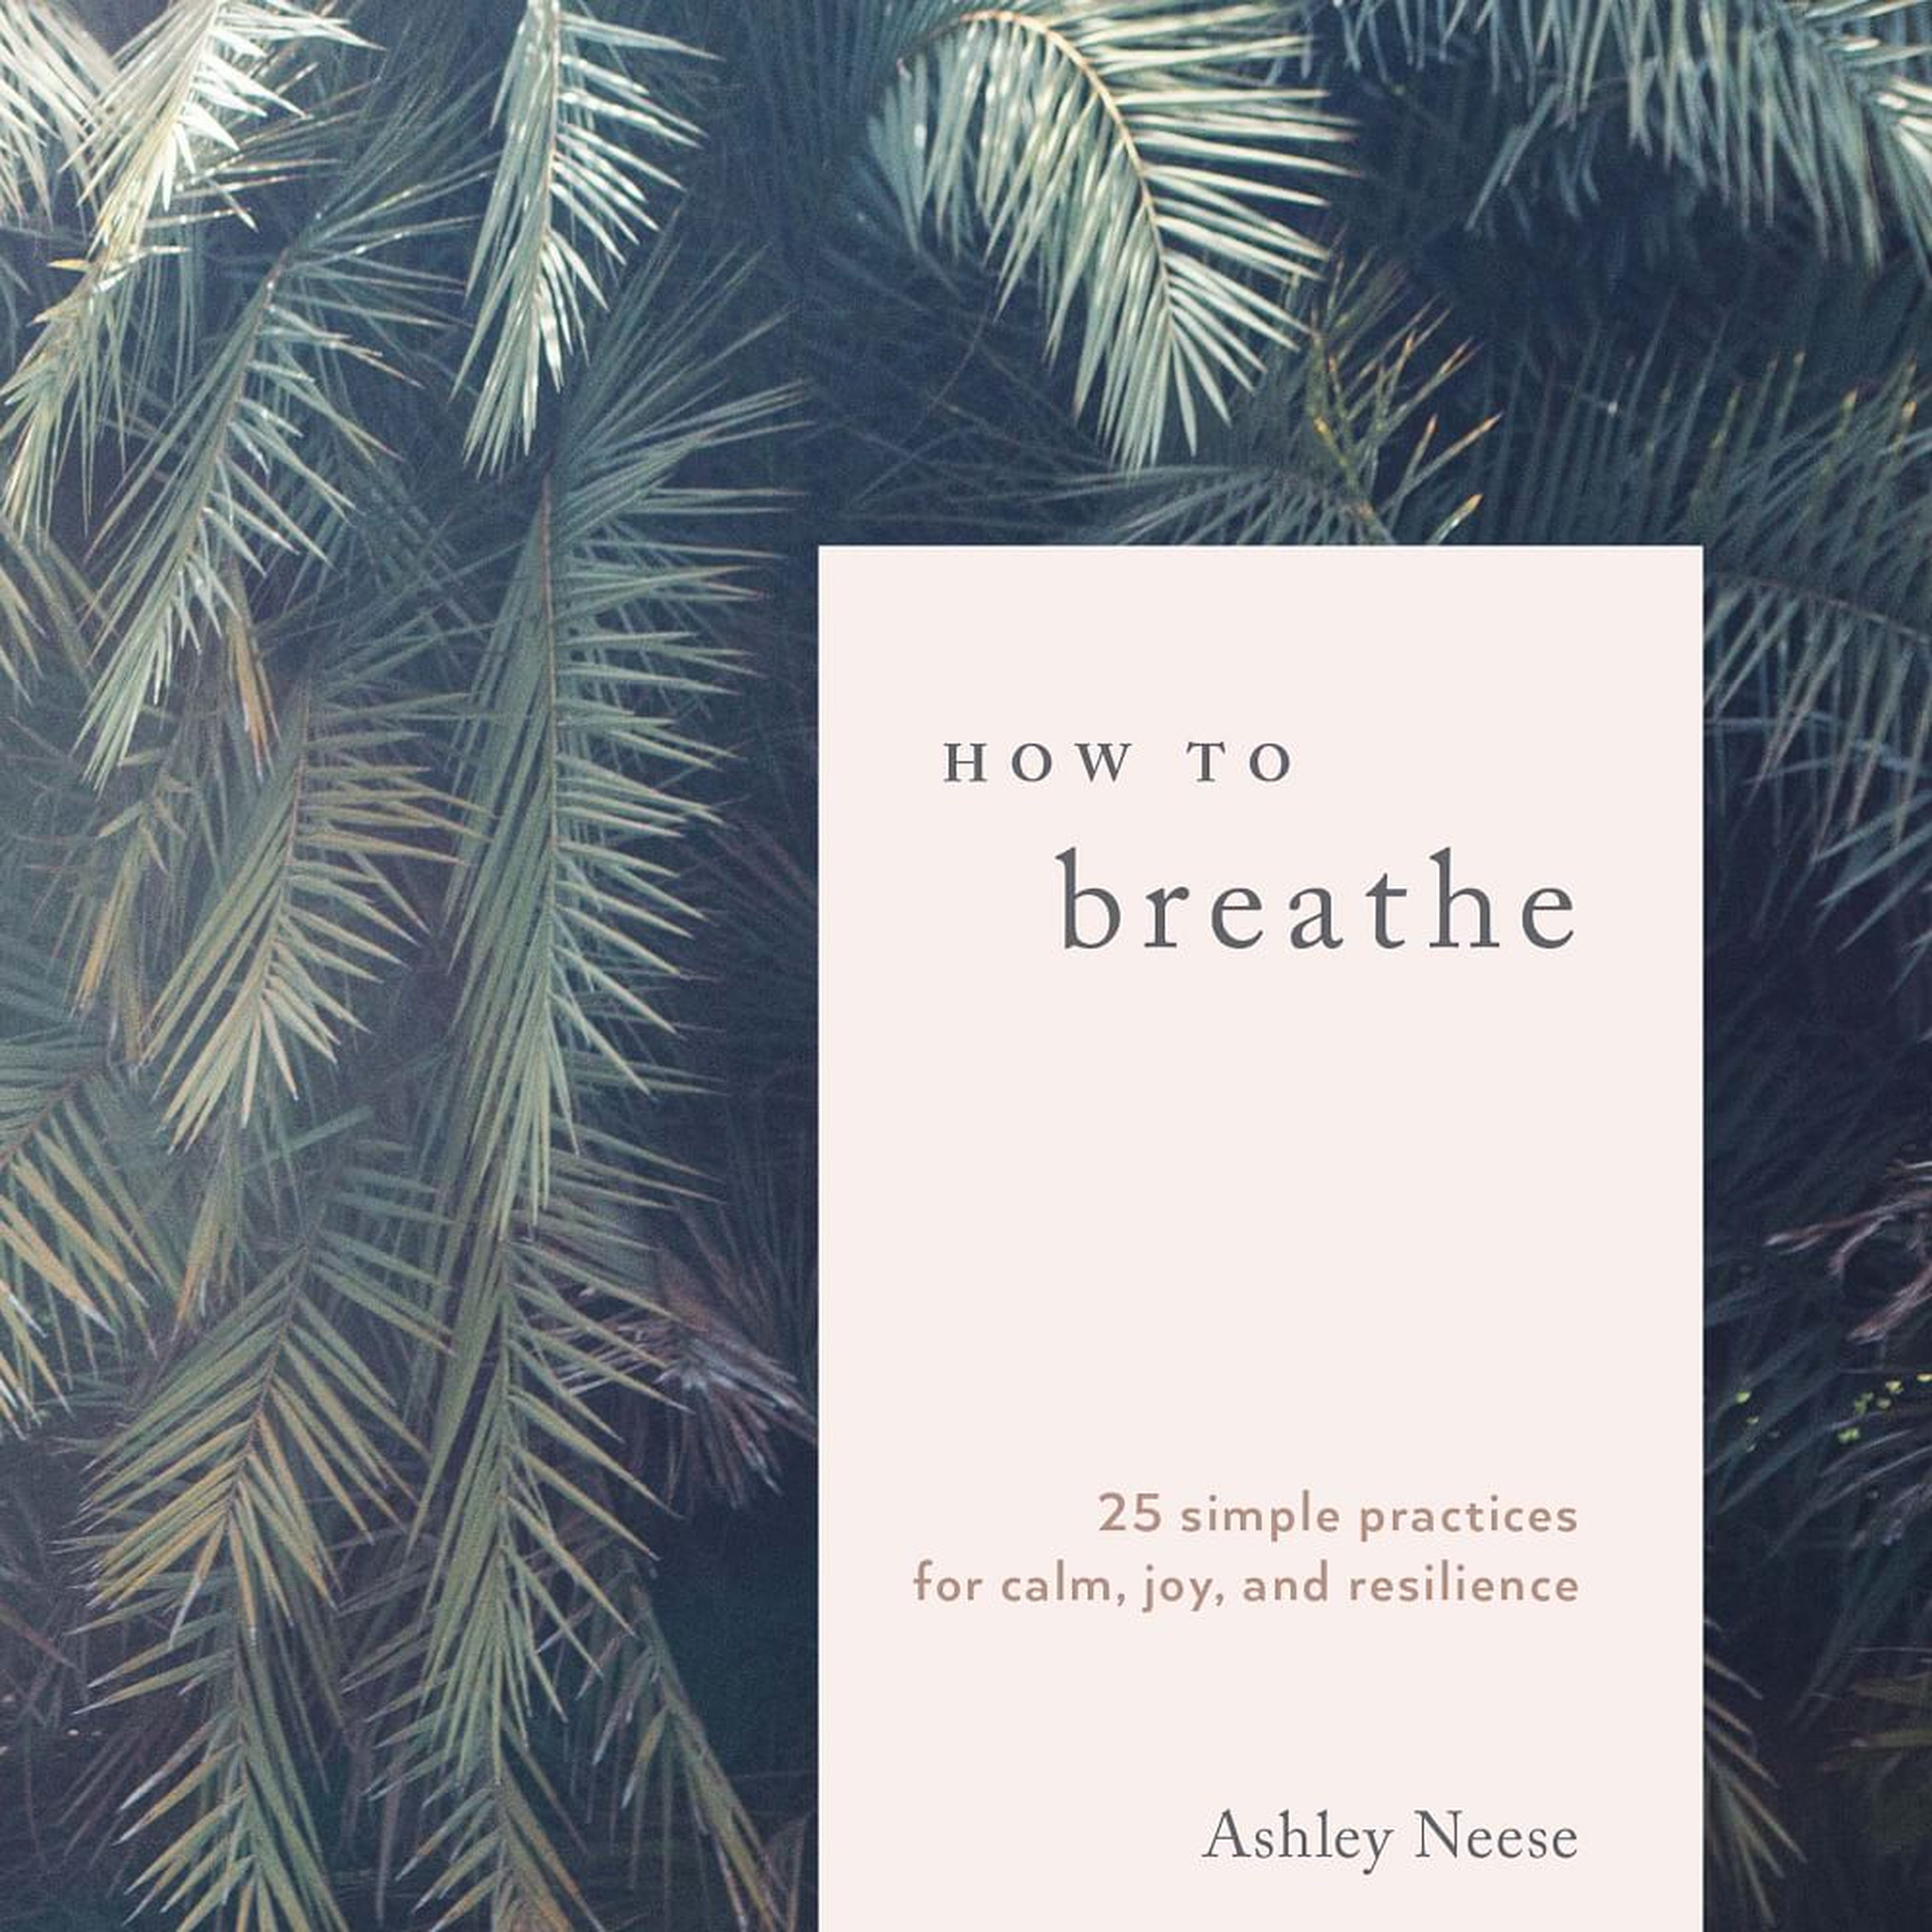 How To Breathe - West Elm